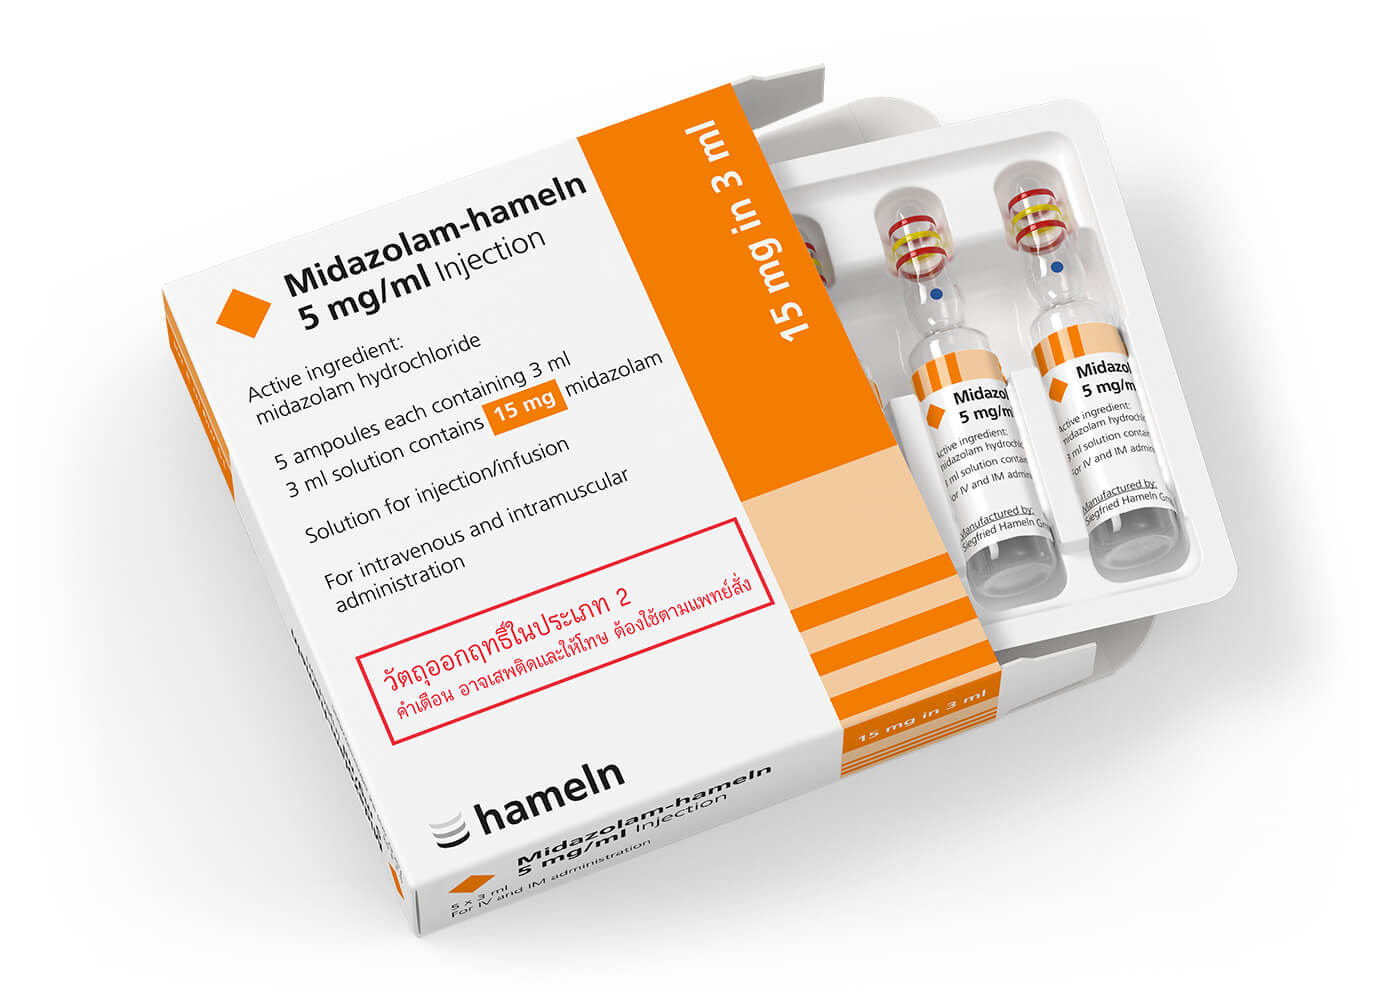 Midazolam_TH_5_mg-ml_in_3_ml_Pack-Amp_5St_SH_2019-28